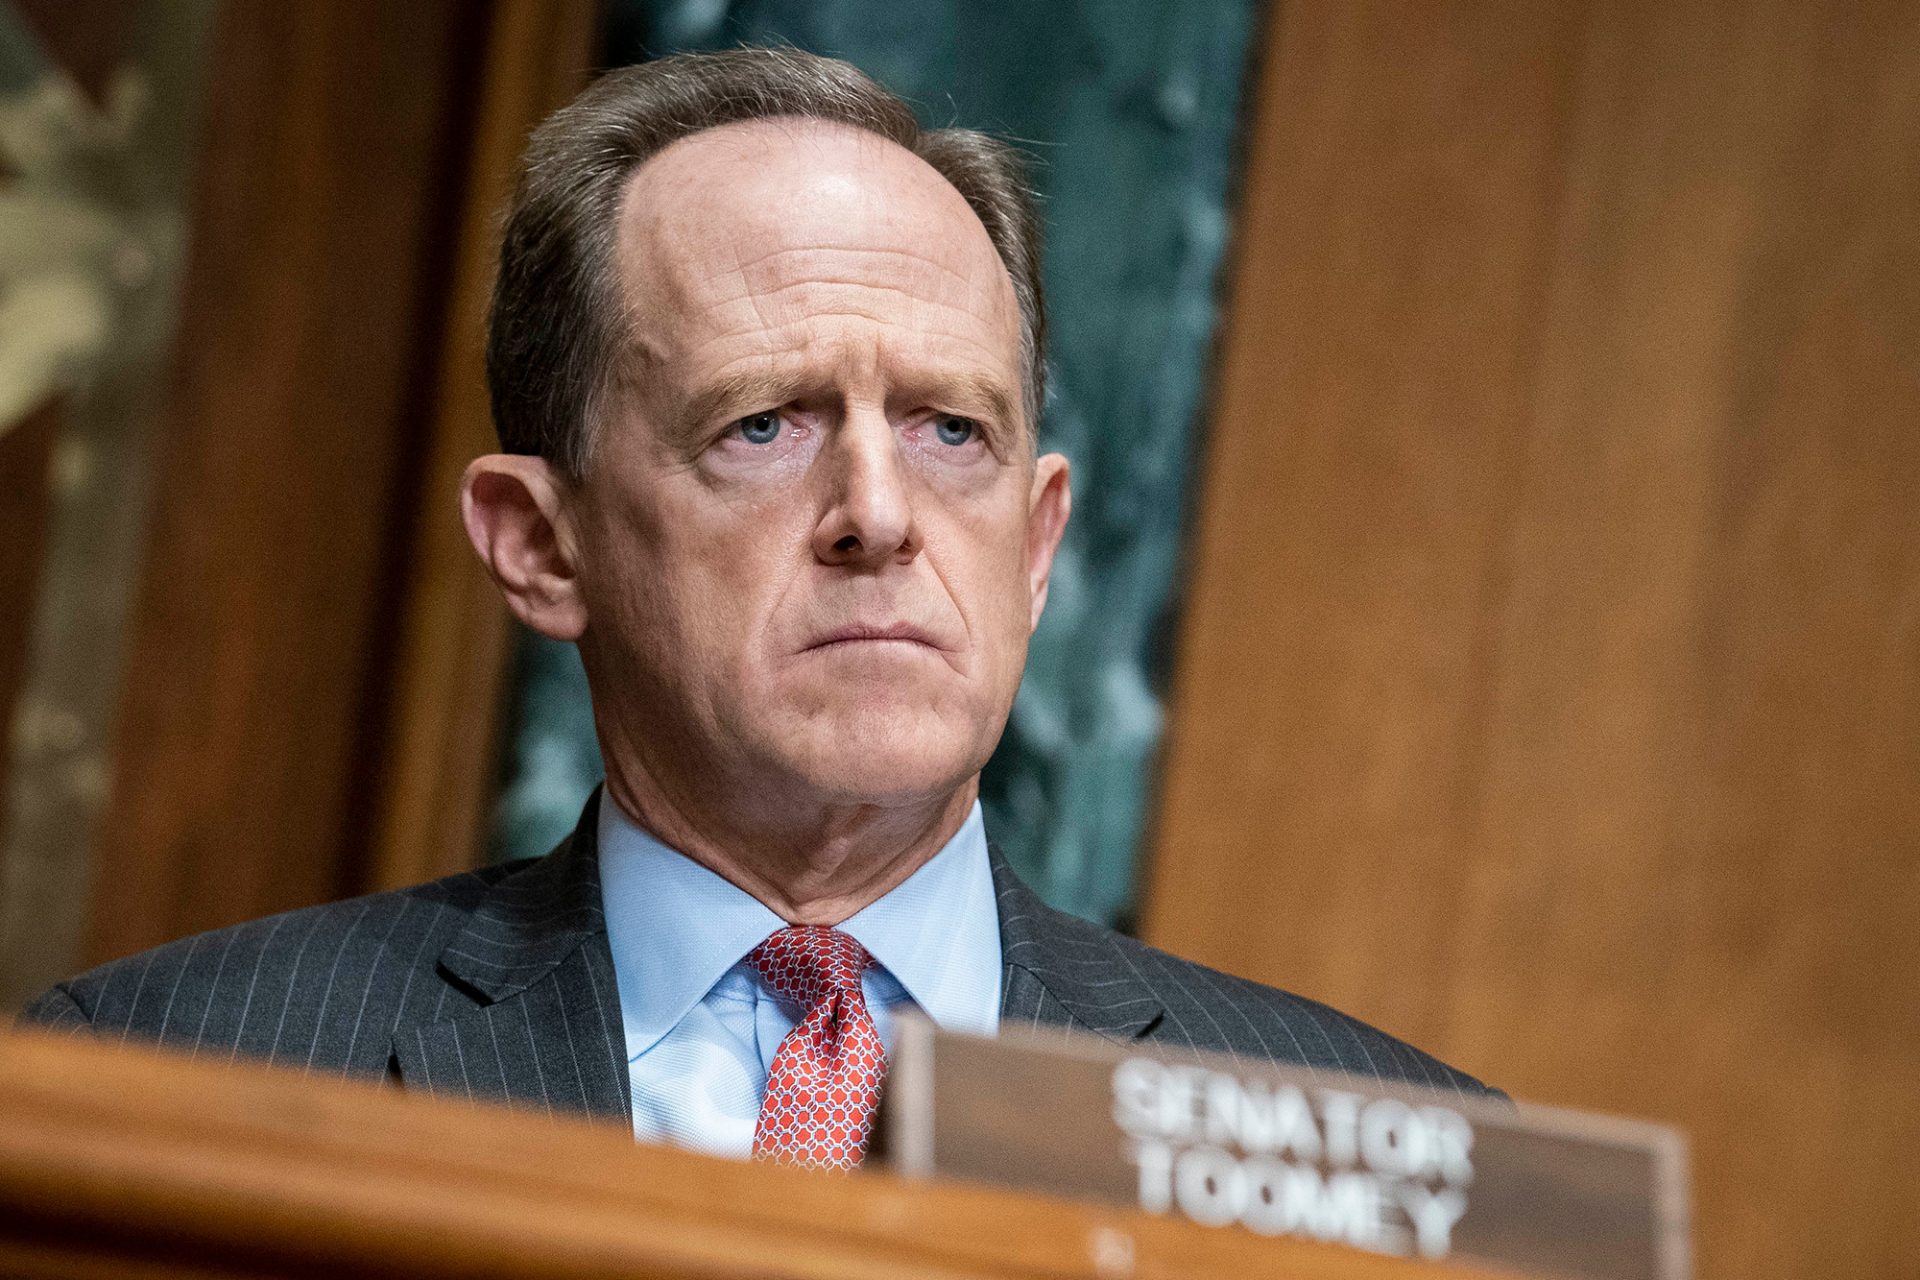 GOP Sen. Pat Toomey says Trump must smooth resign, questions impeachment timing